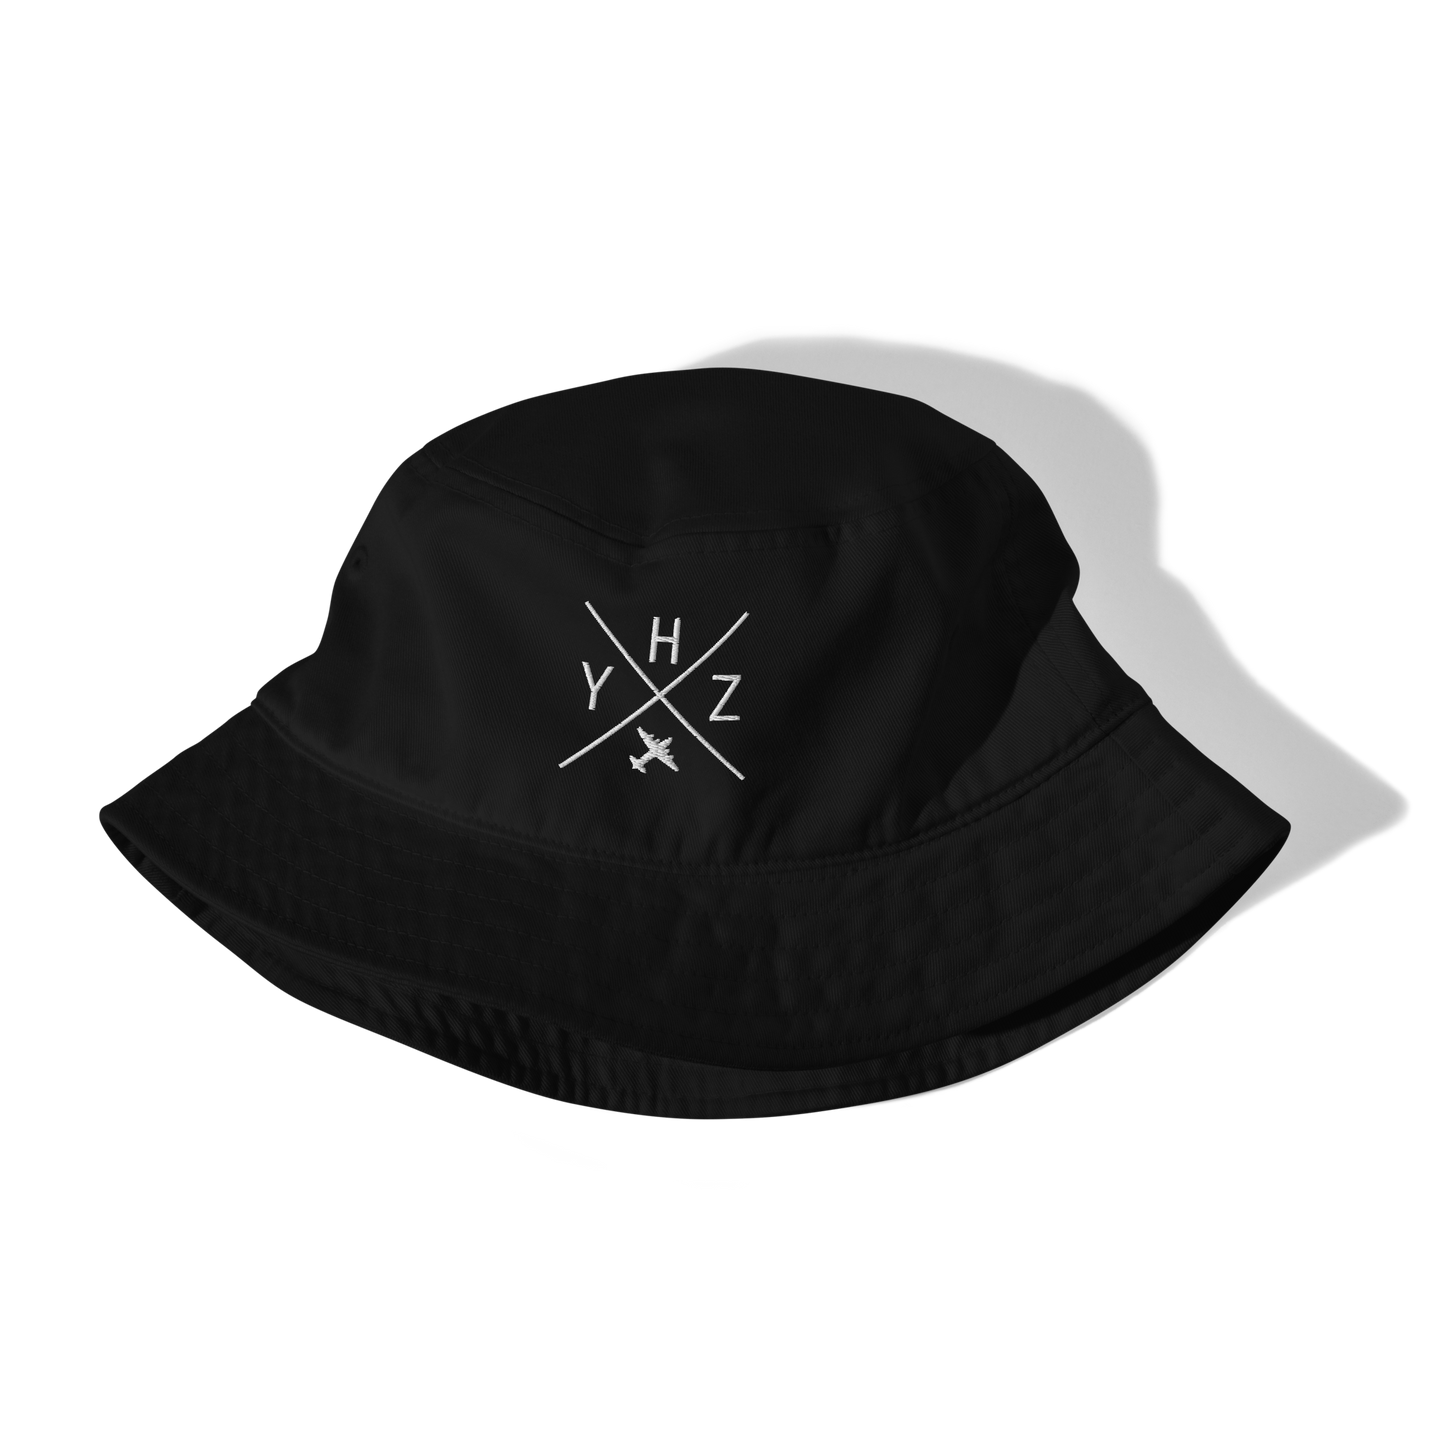 YHM Designs - YHZ Halifax Organic Cotton Bucket Hat - Crossed-X Design with Airport Code and Vintage Propliner - White Embroidery - Image 02